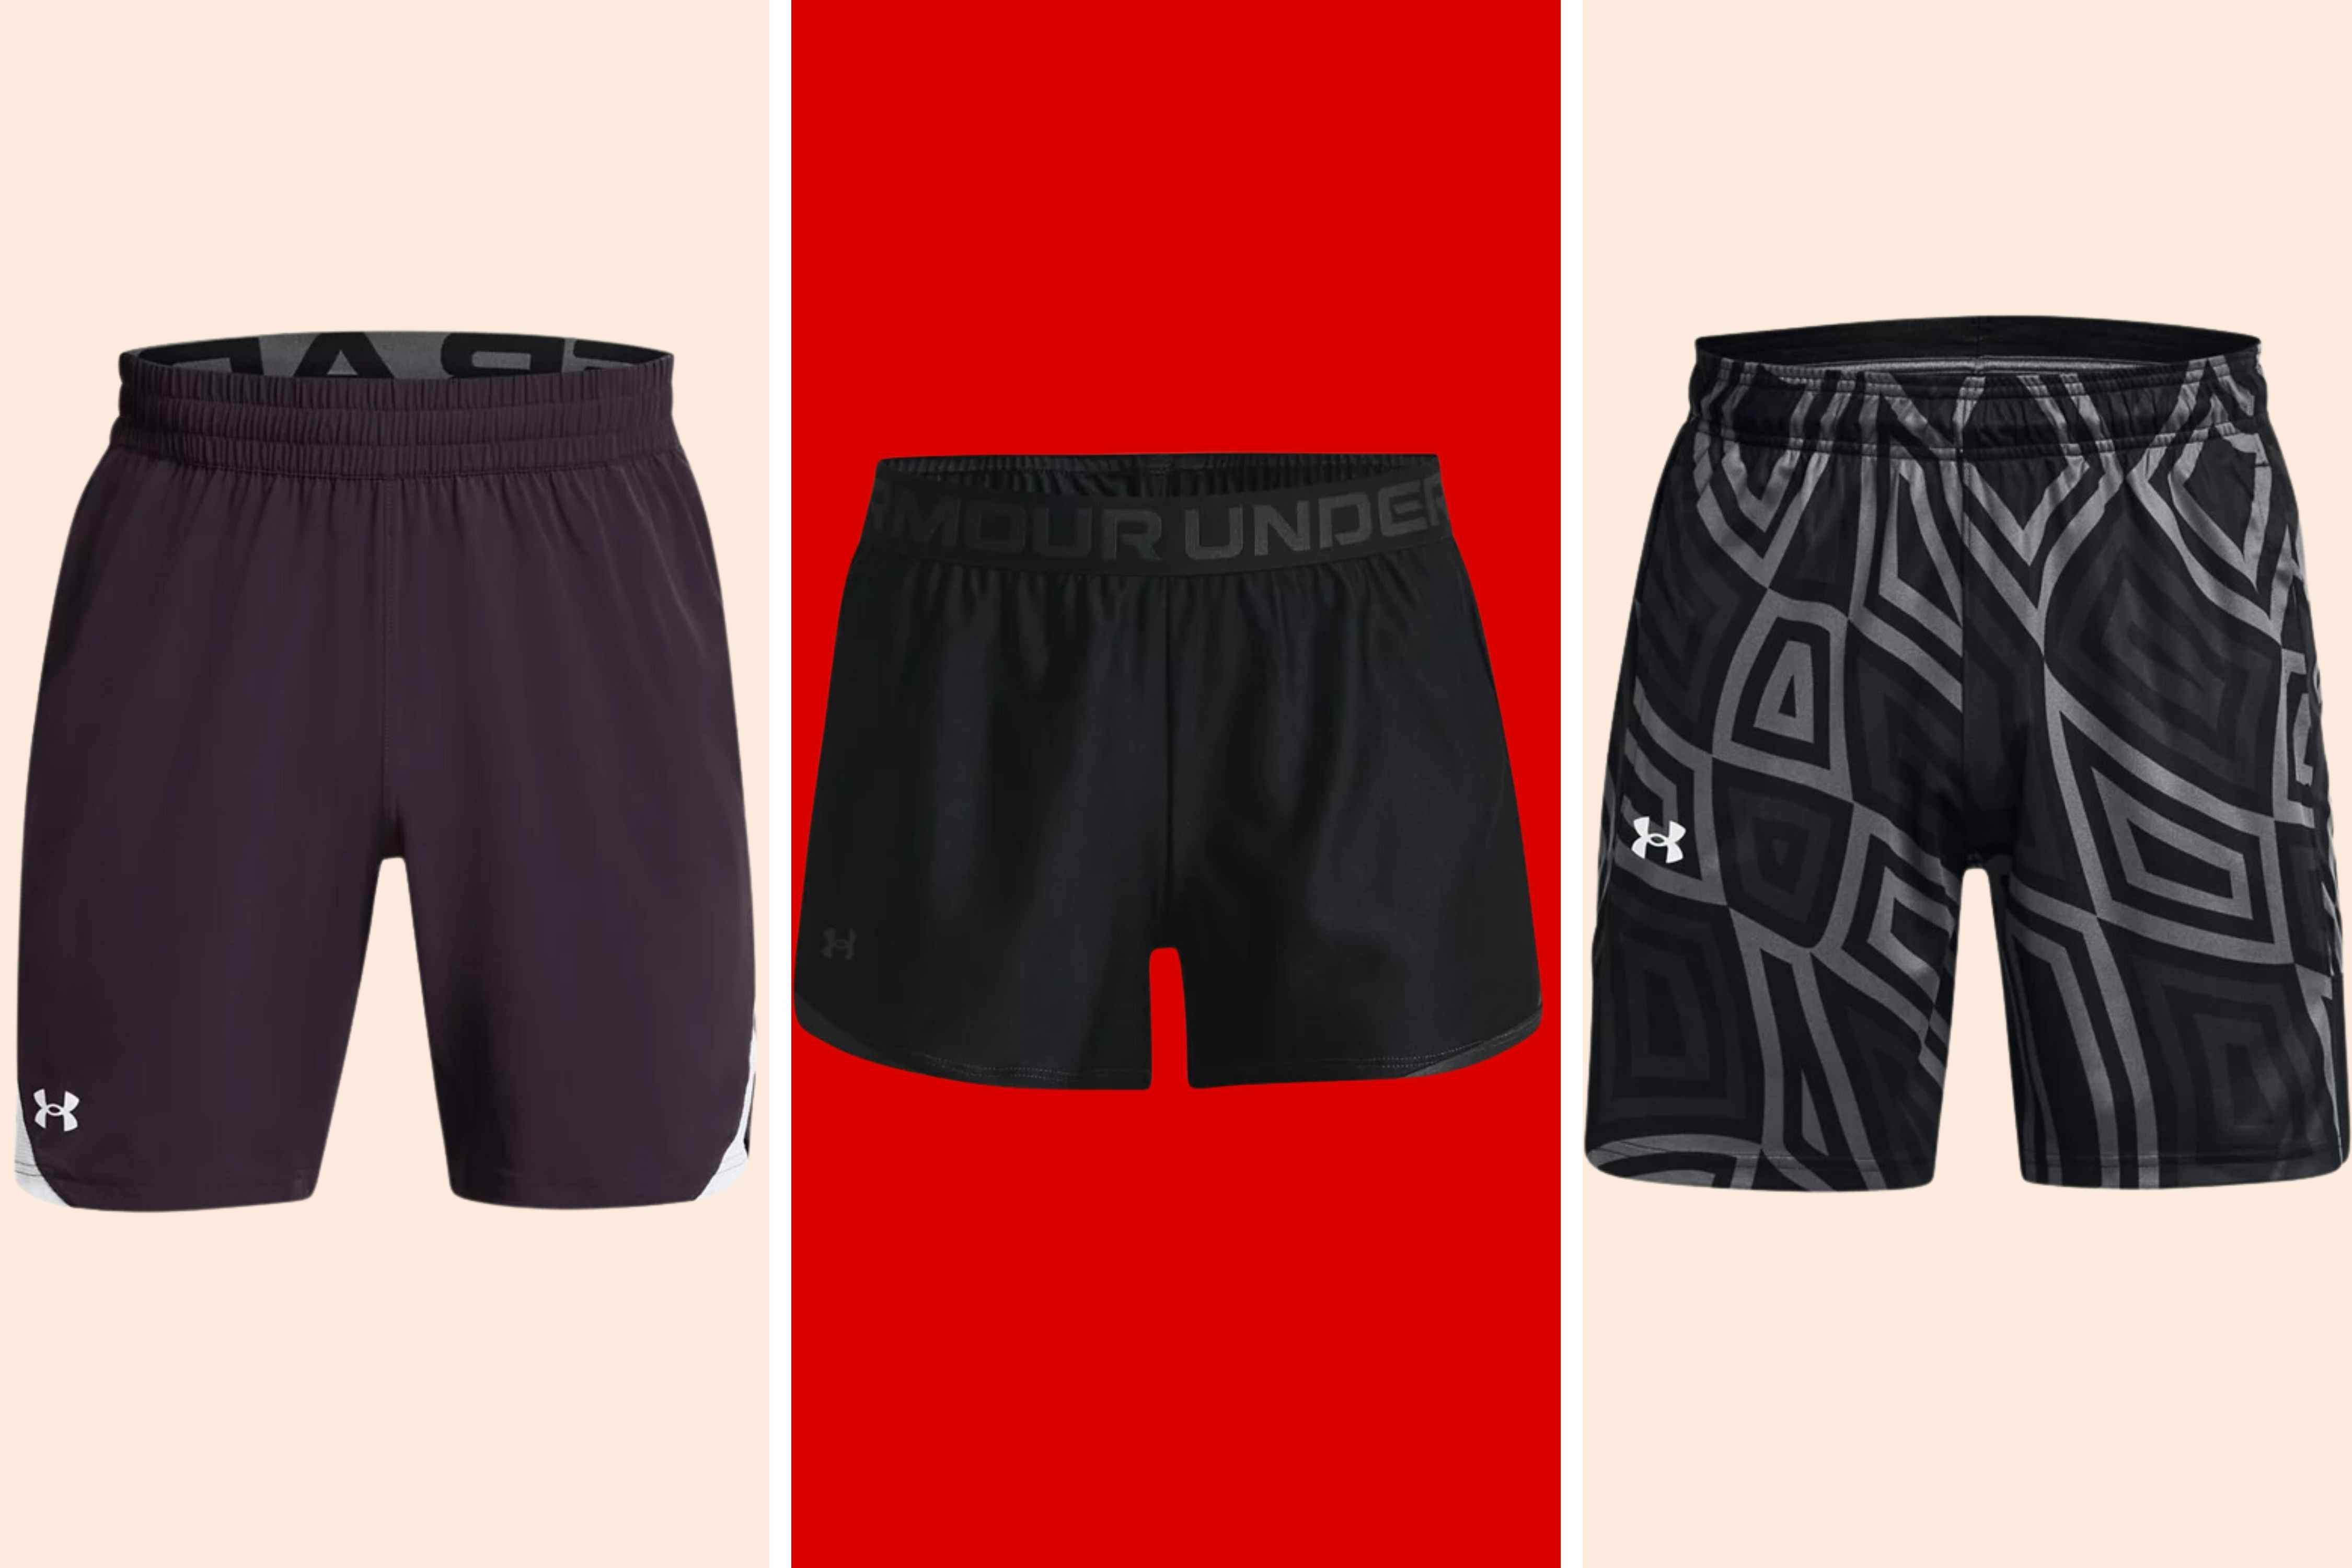 Under Armour Shorts on Sale: $18 Men's Shorts, $10 Kids' Shorts, and More